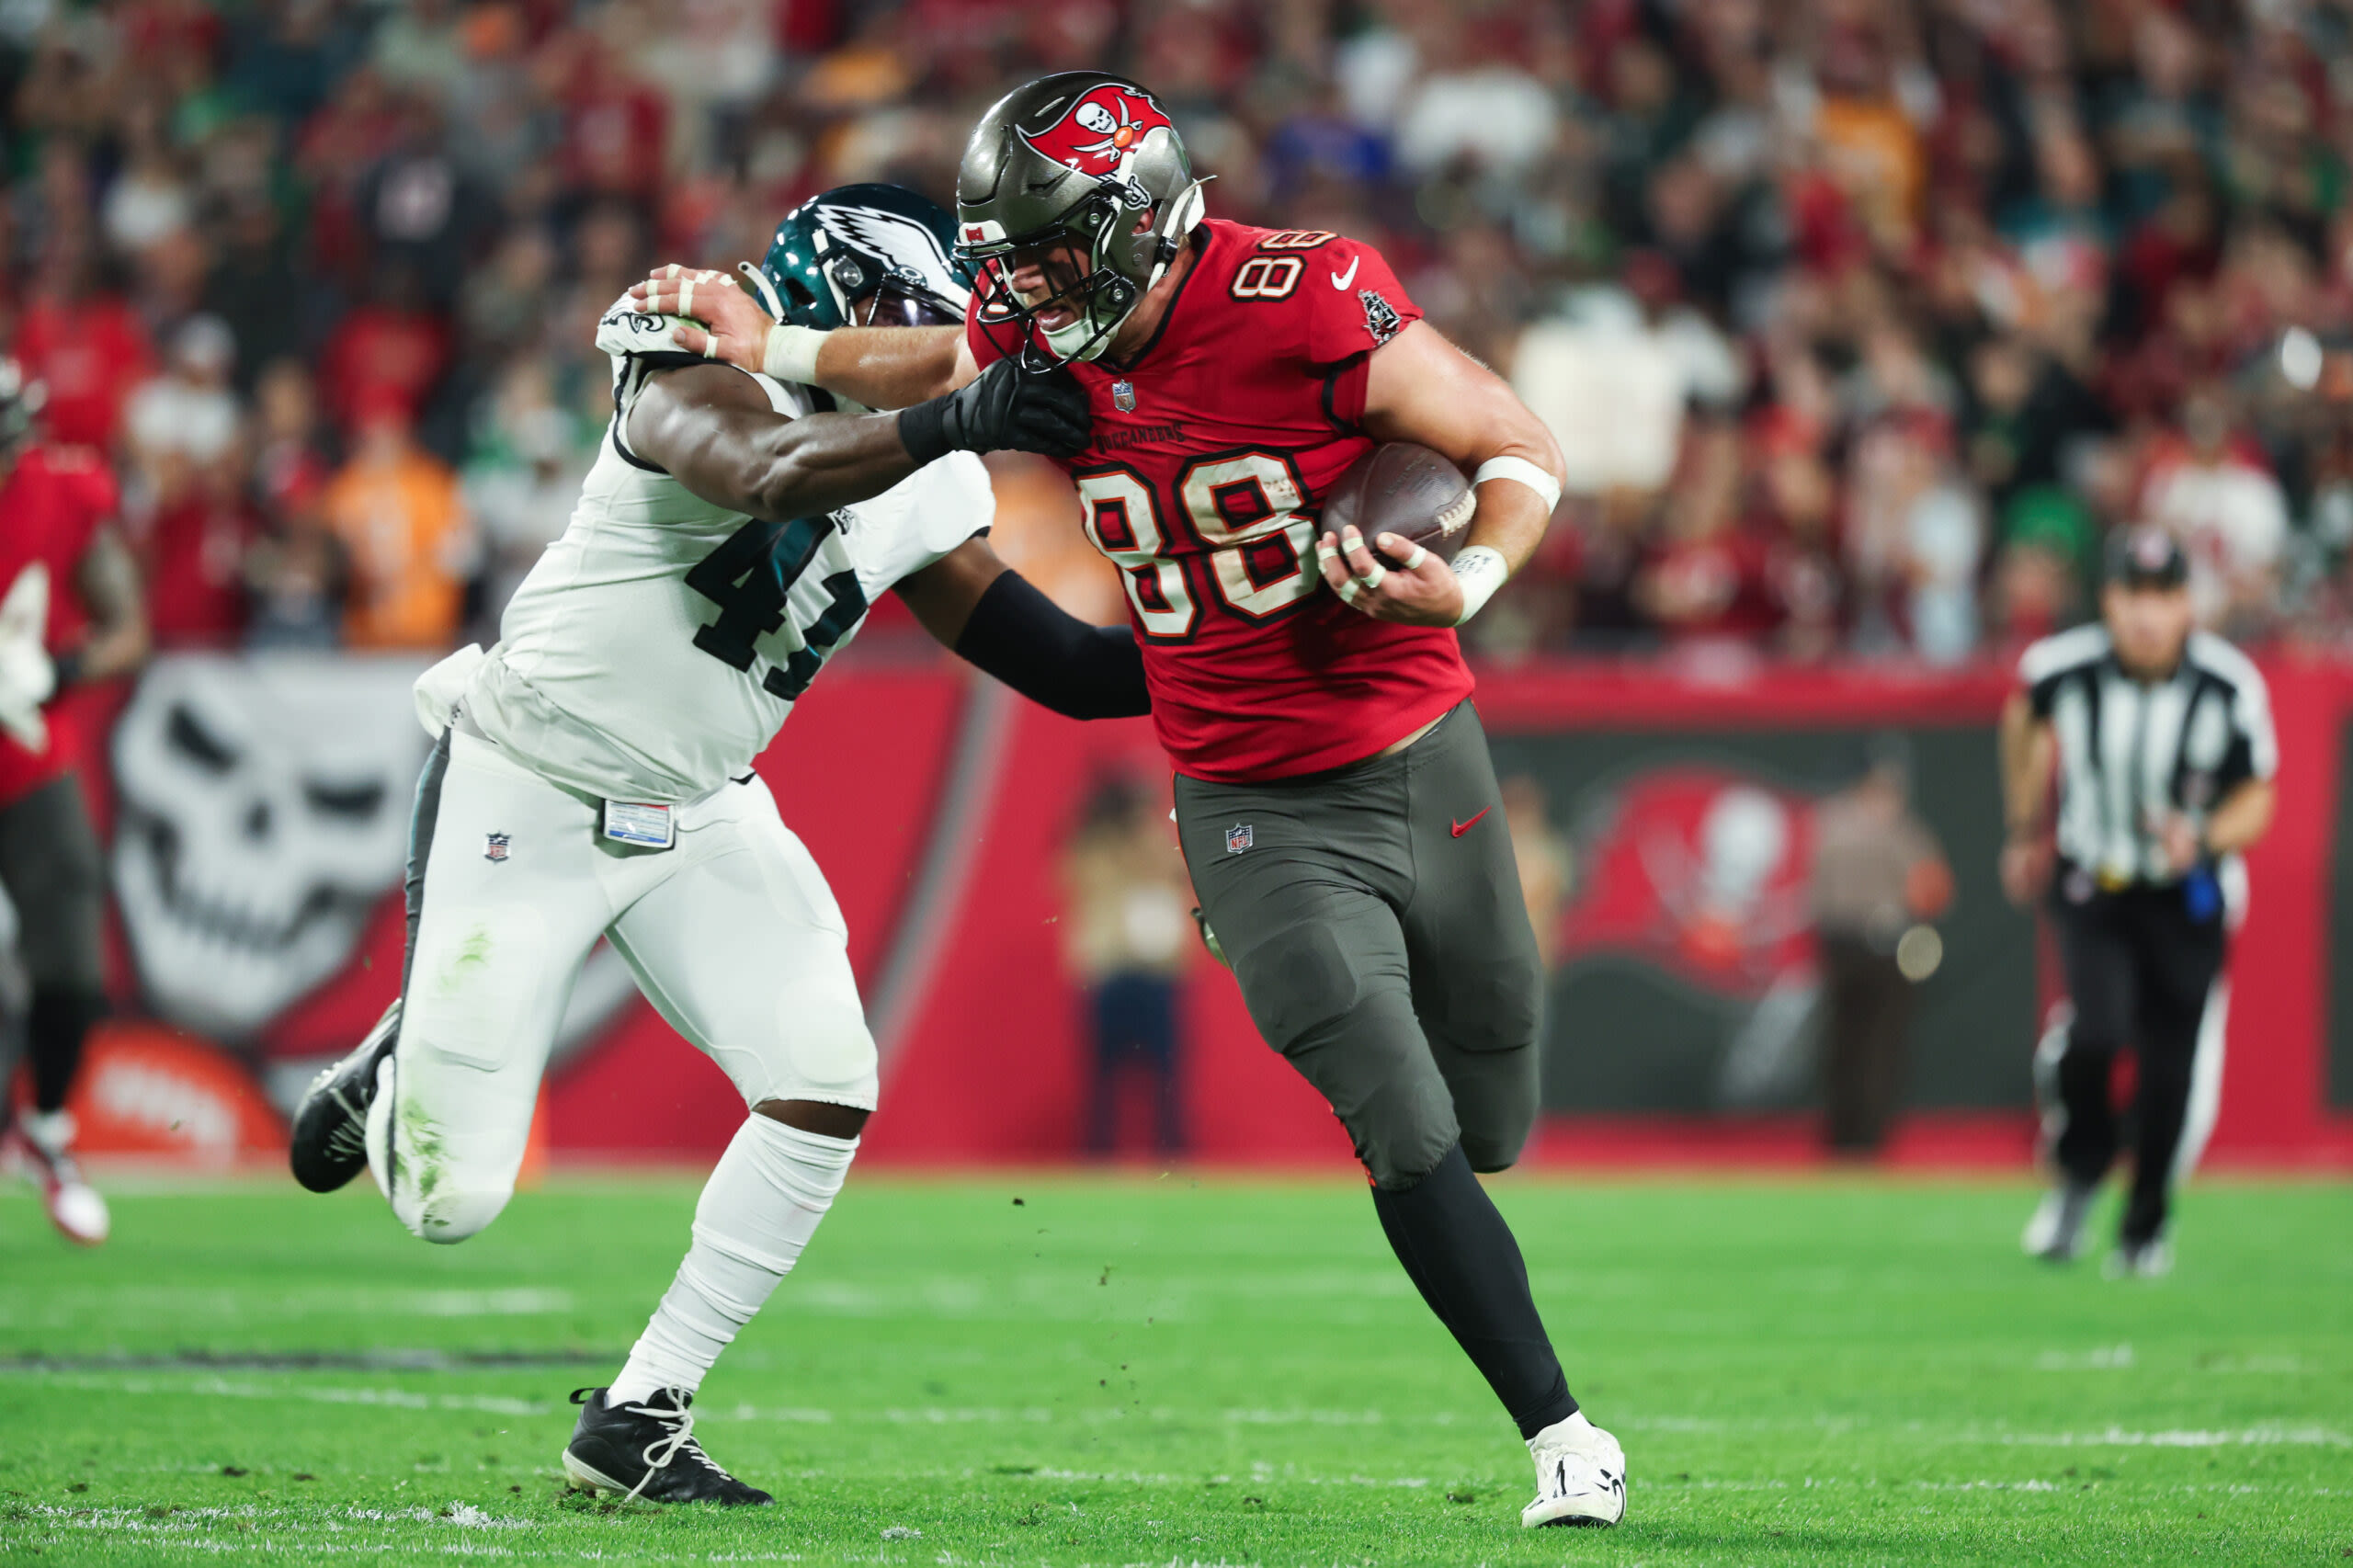 Cade Otton brings valuable durability at TE for Bucs